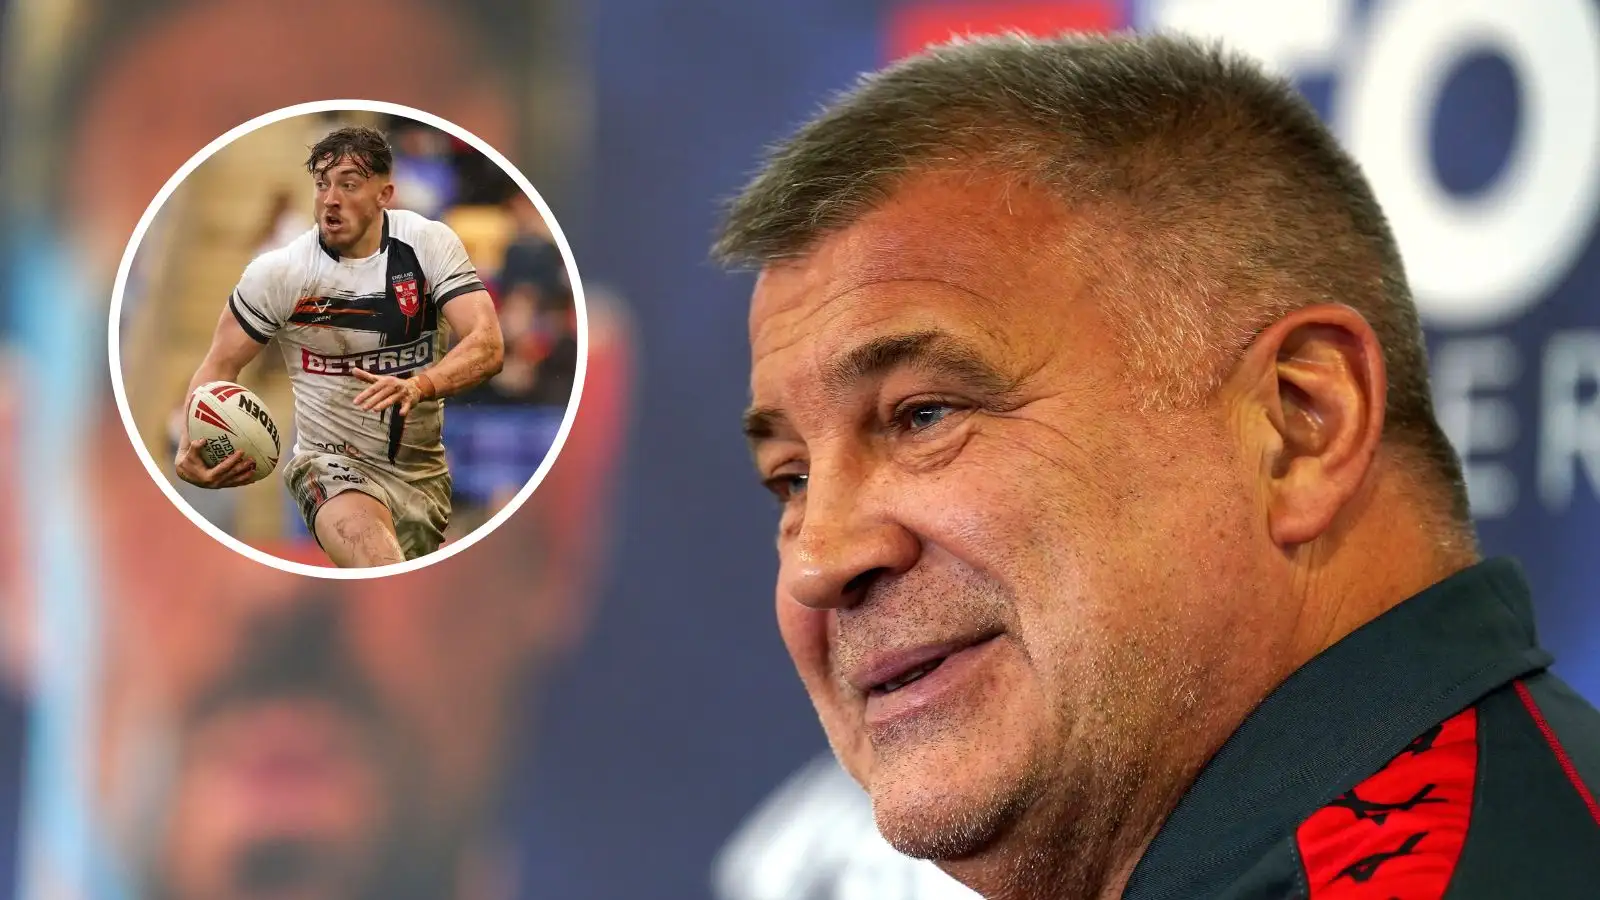 England boss Shaun Wane expresses ‘genuine excitement’ about Warrington Wolves ace as he lauds rising stars